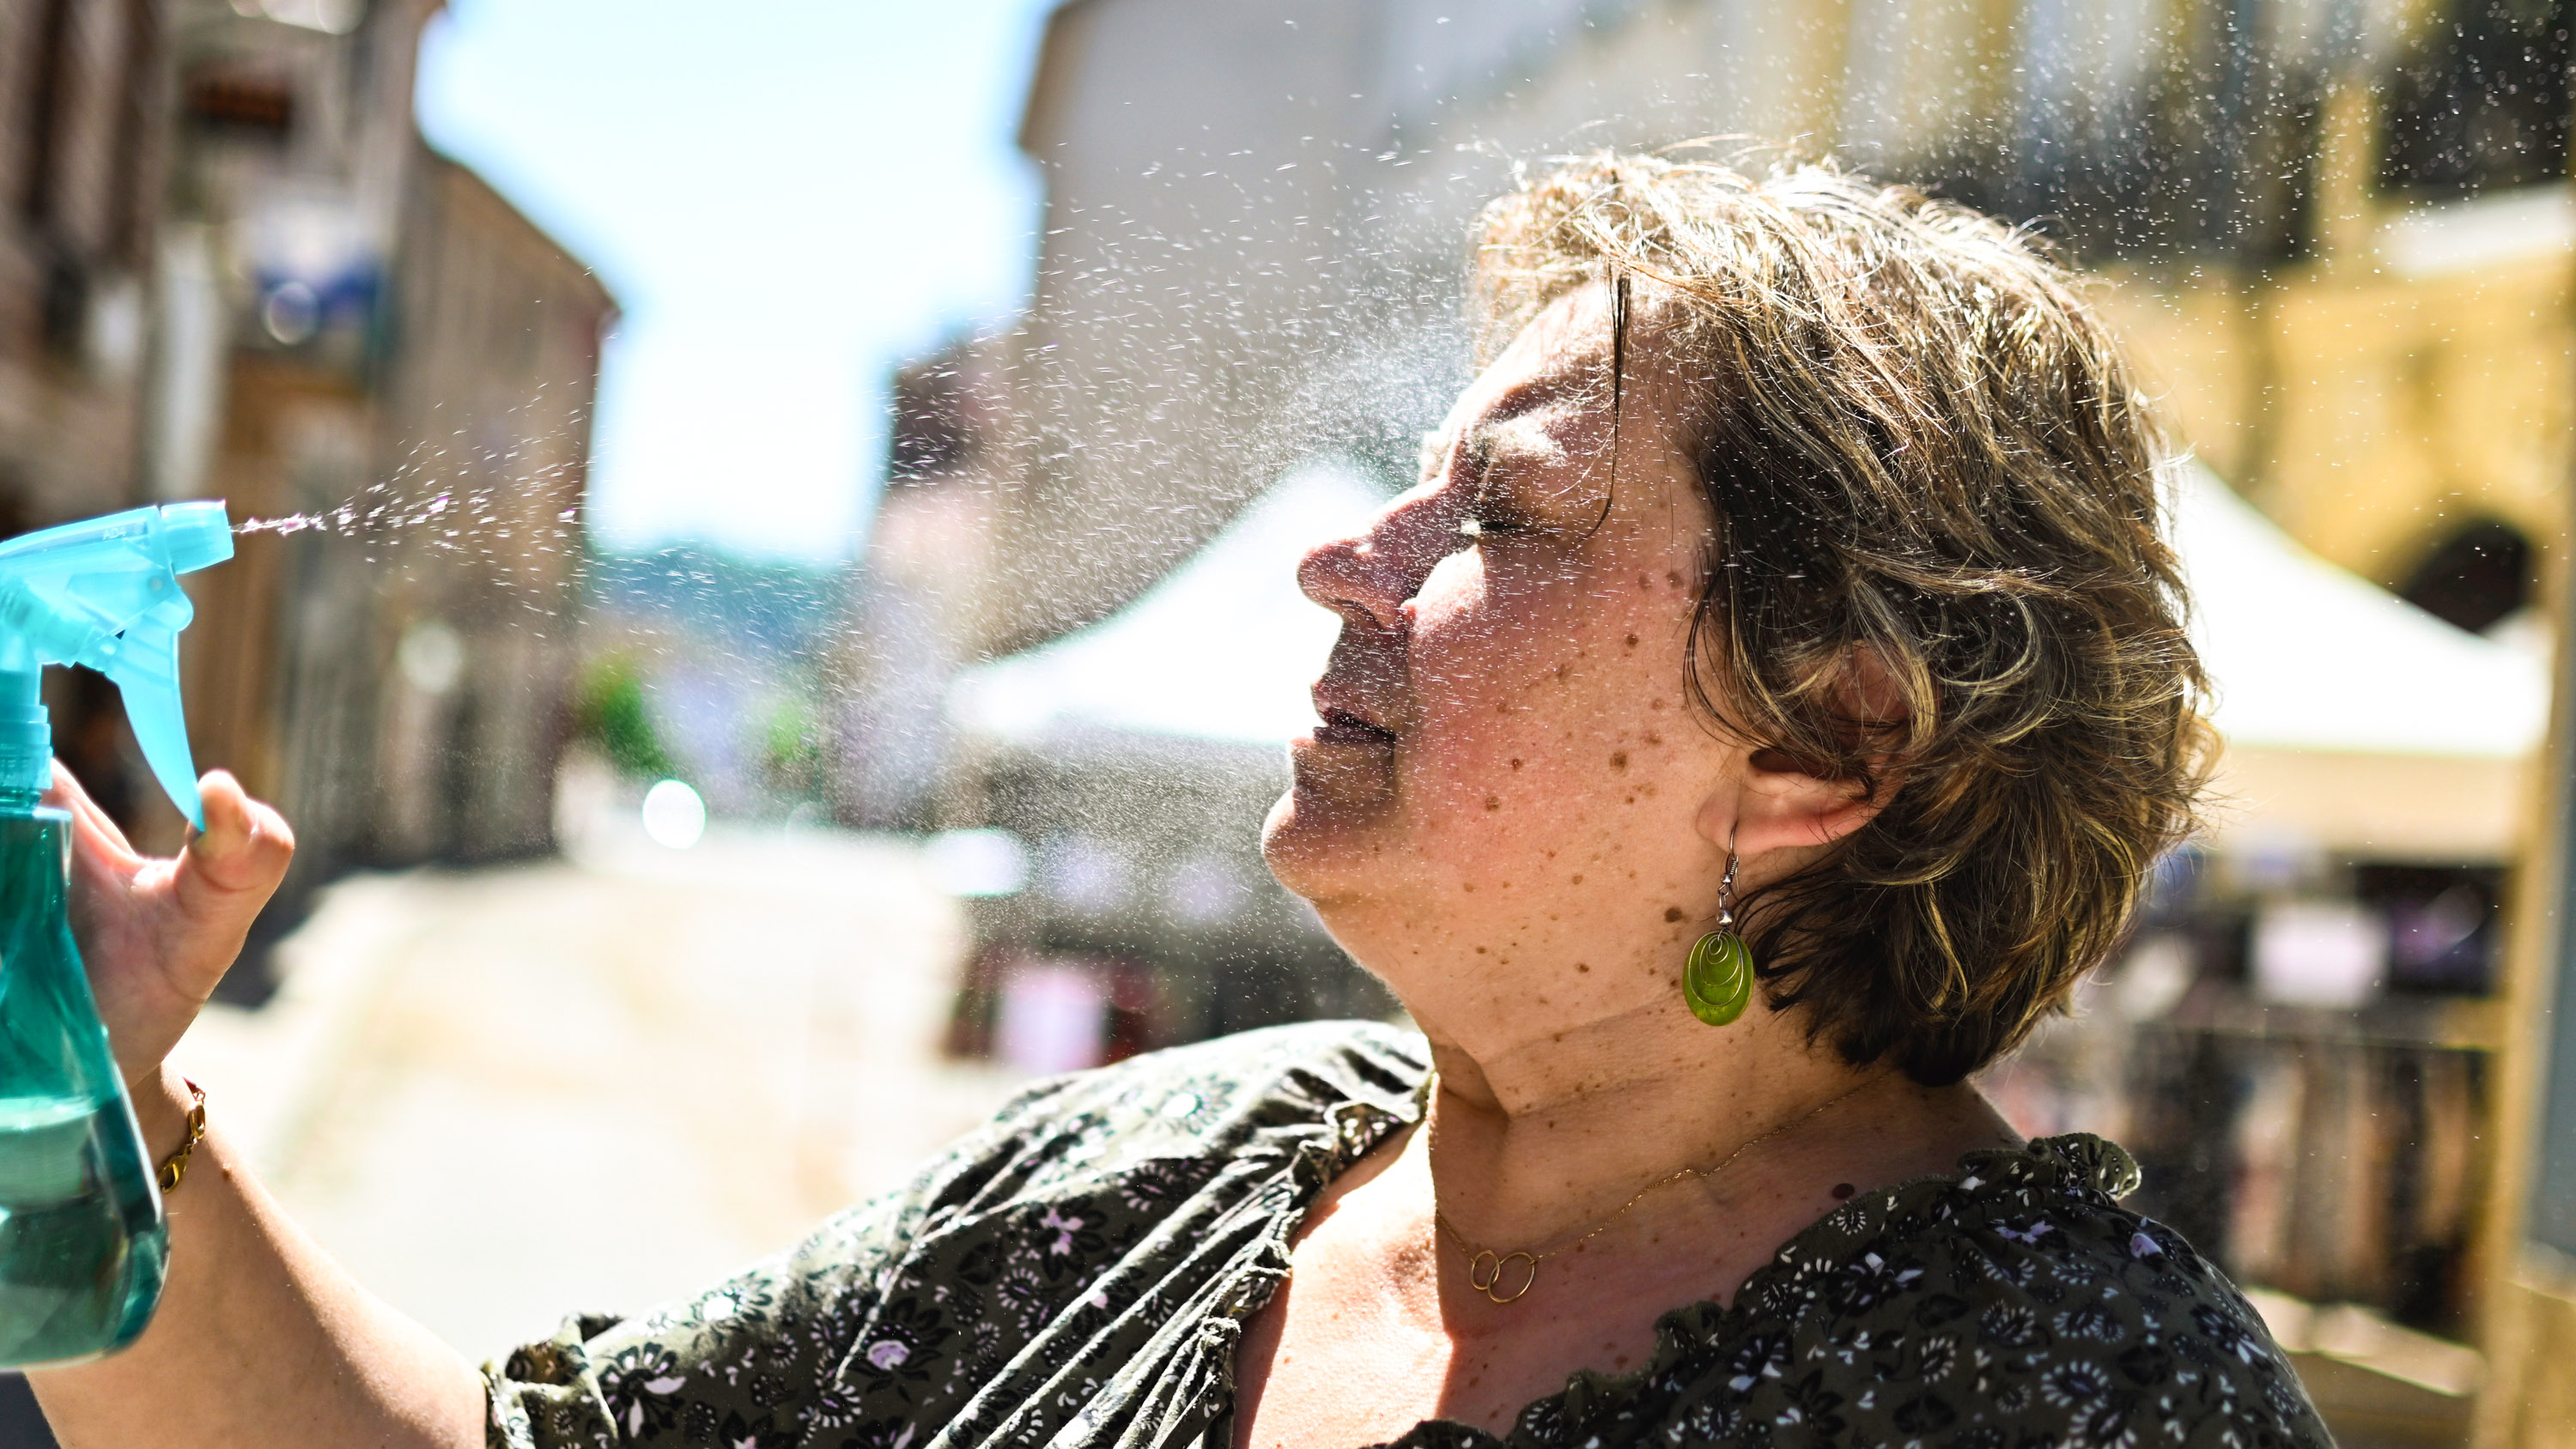 A woman sprays herself with water to cool down.